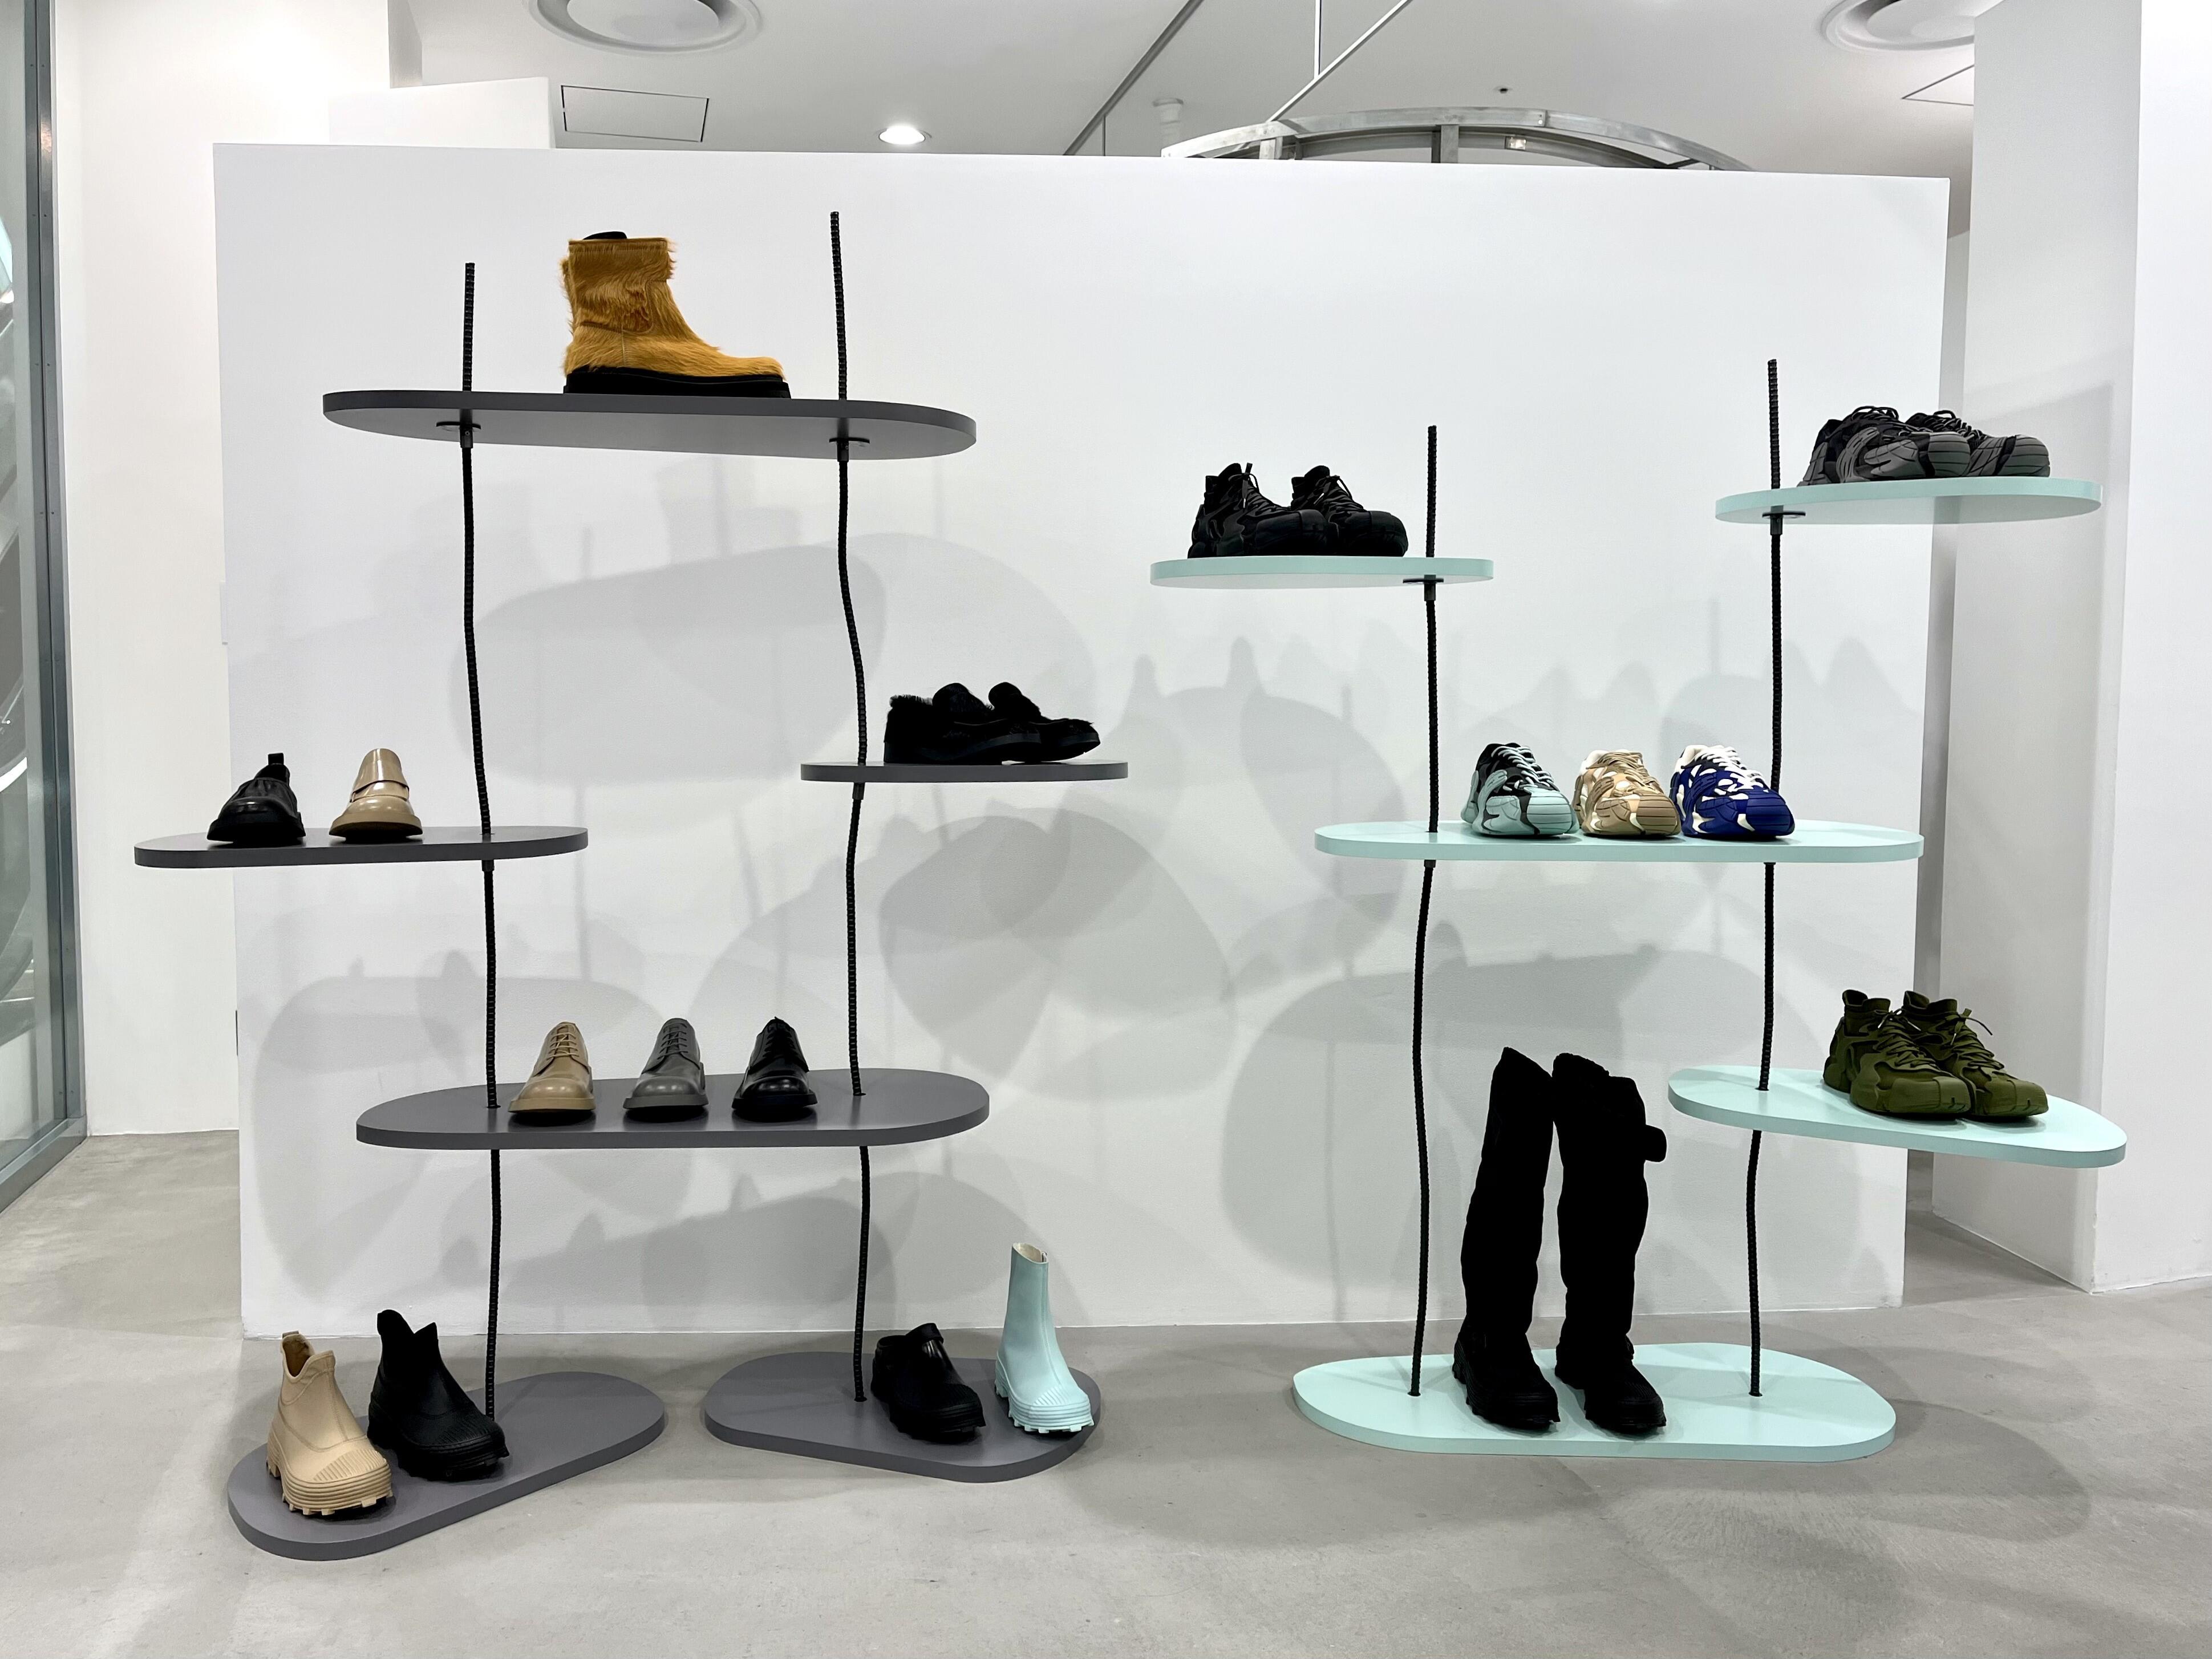 CAMPERLAB POP UP STORE <br>at DOVER STREET MARKET GINZA